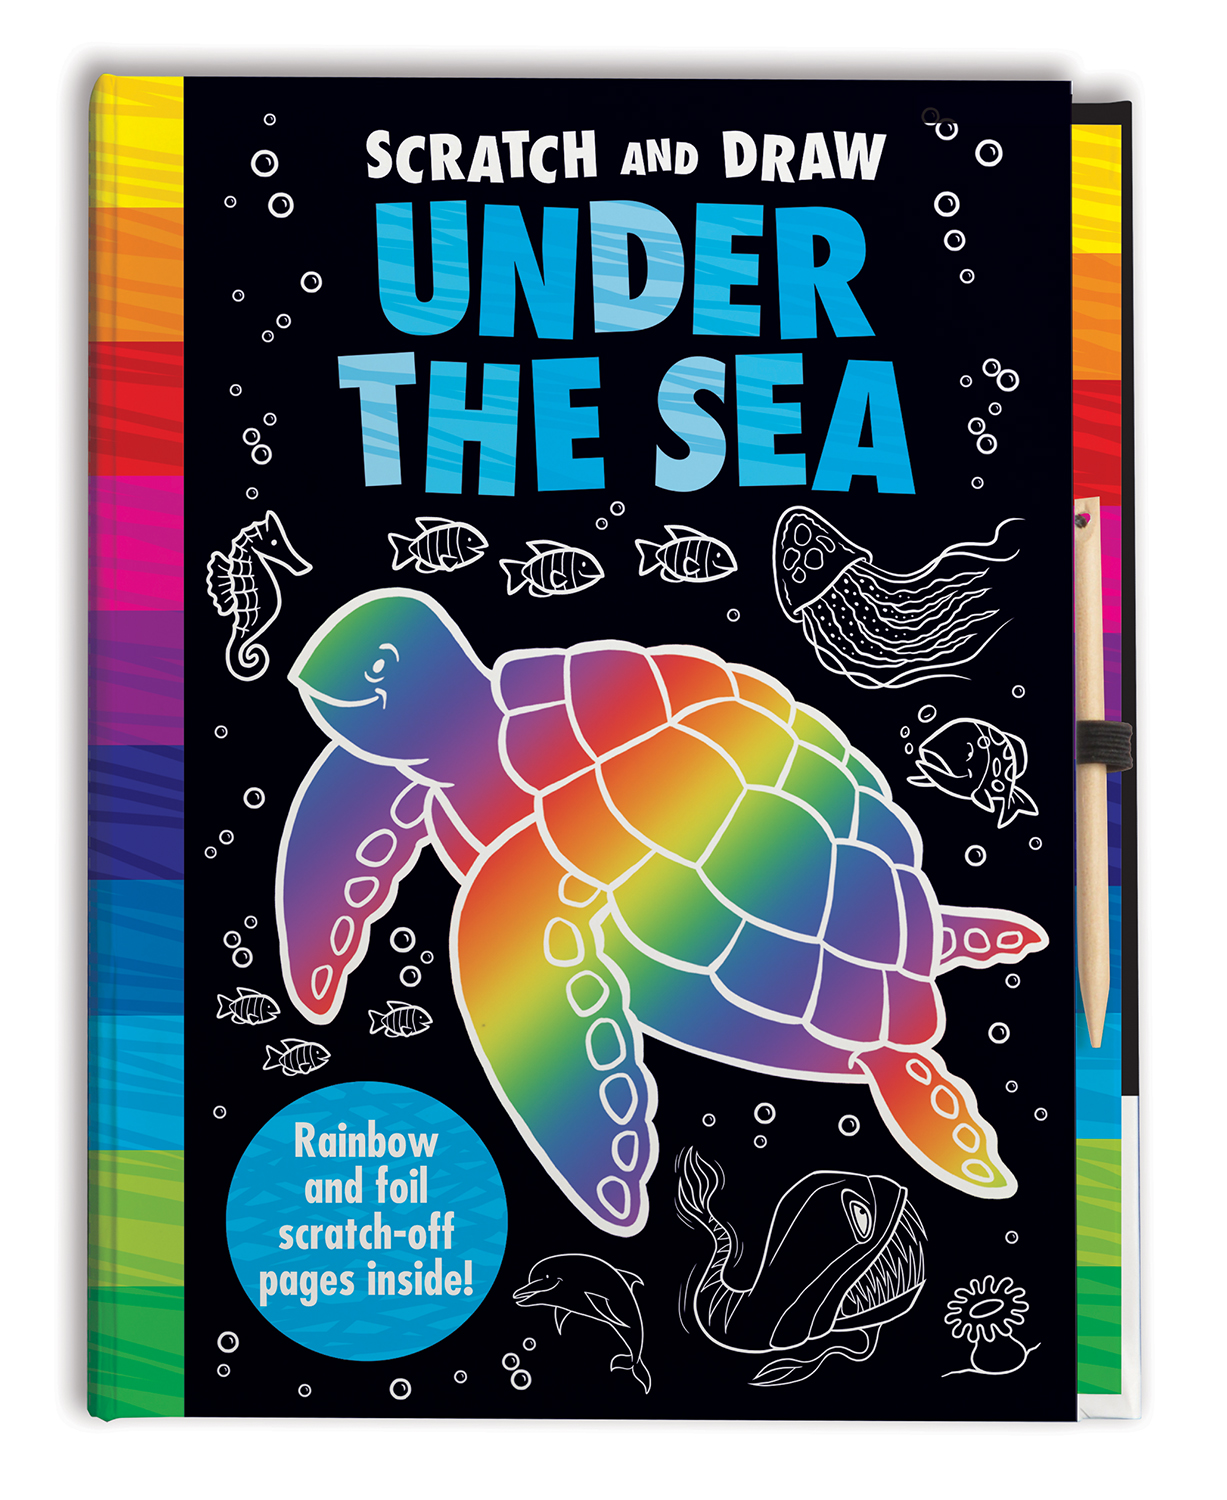 SCRATCH AND DRAW UNDER THE SEA